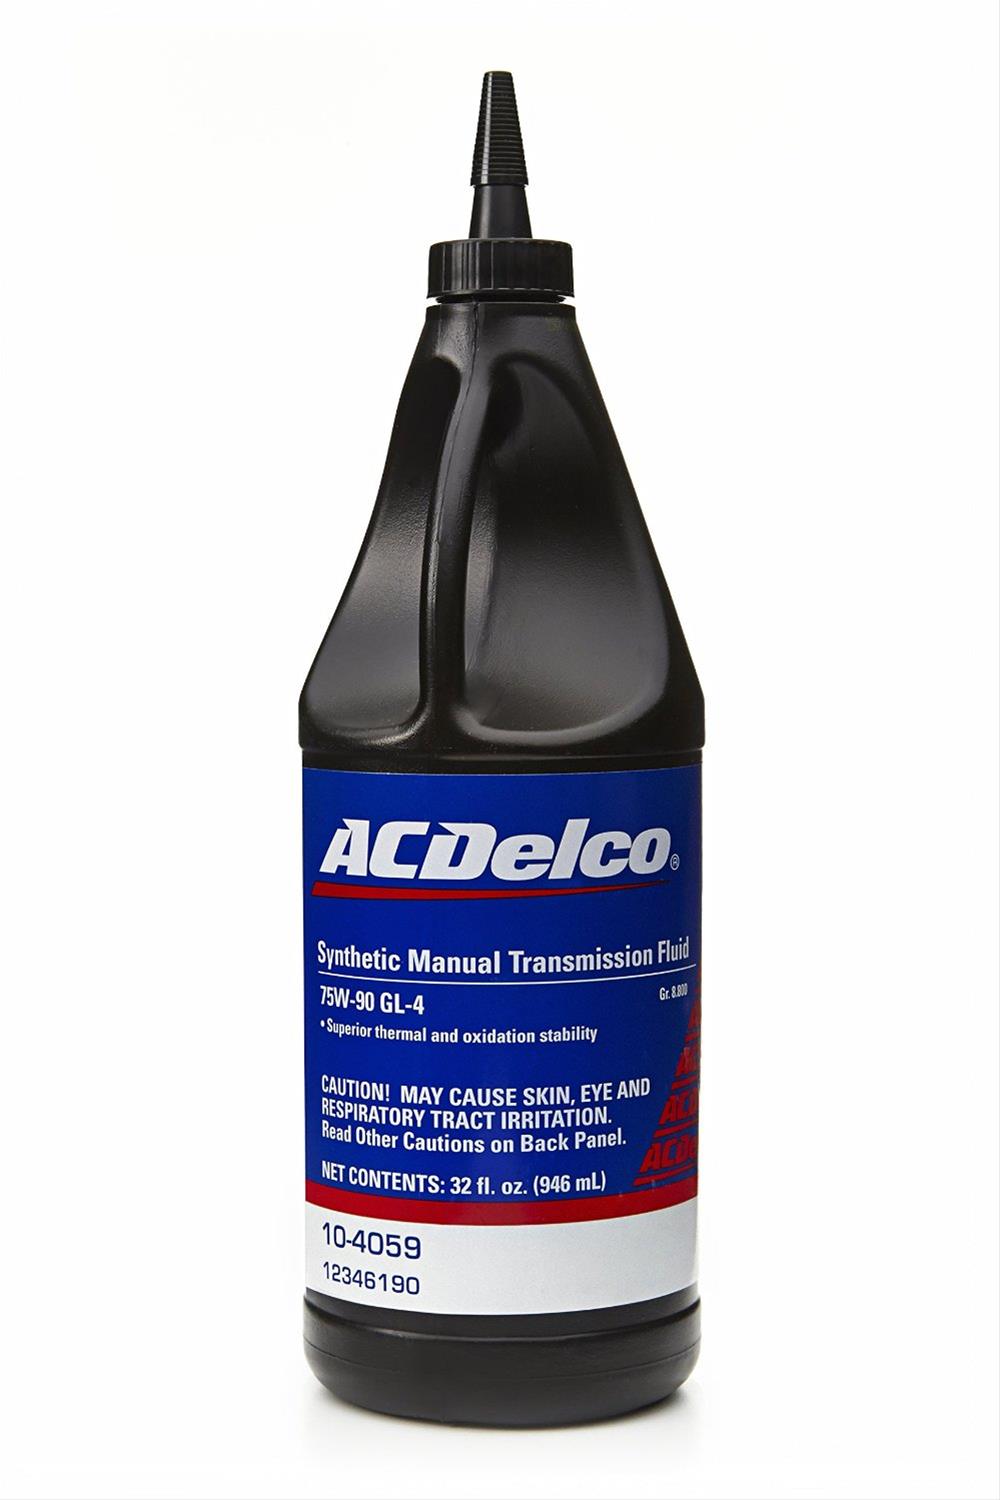 ACDelco 8L90 Transmission Service Kit Mobil1 Fluid For 2015+ Chevy